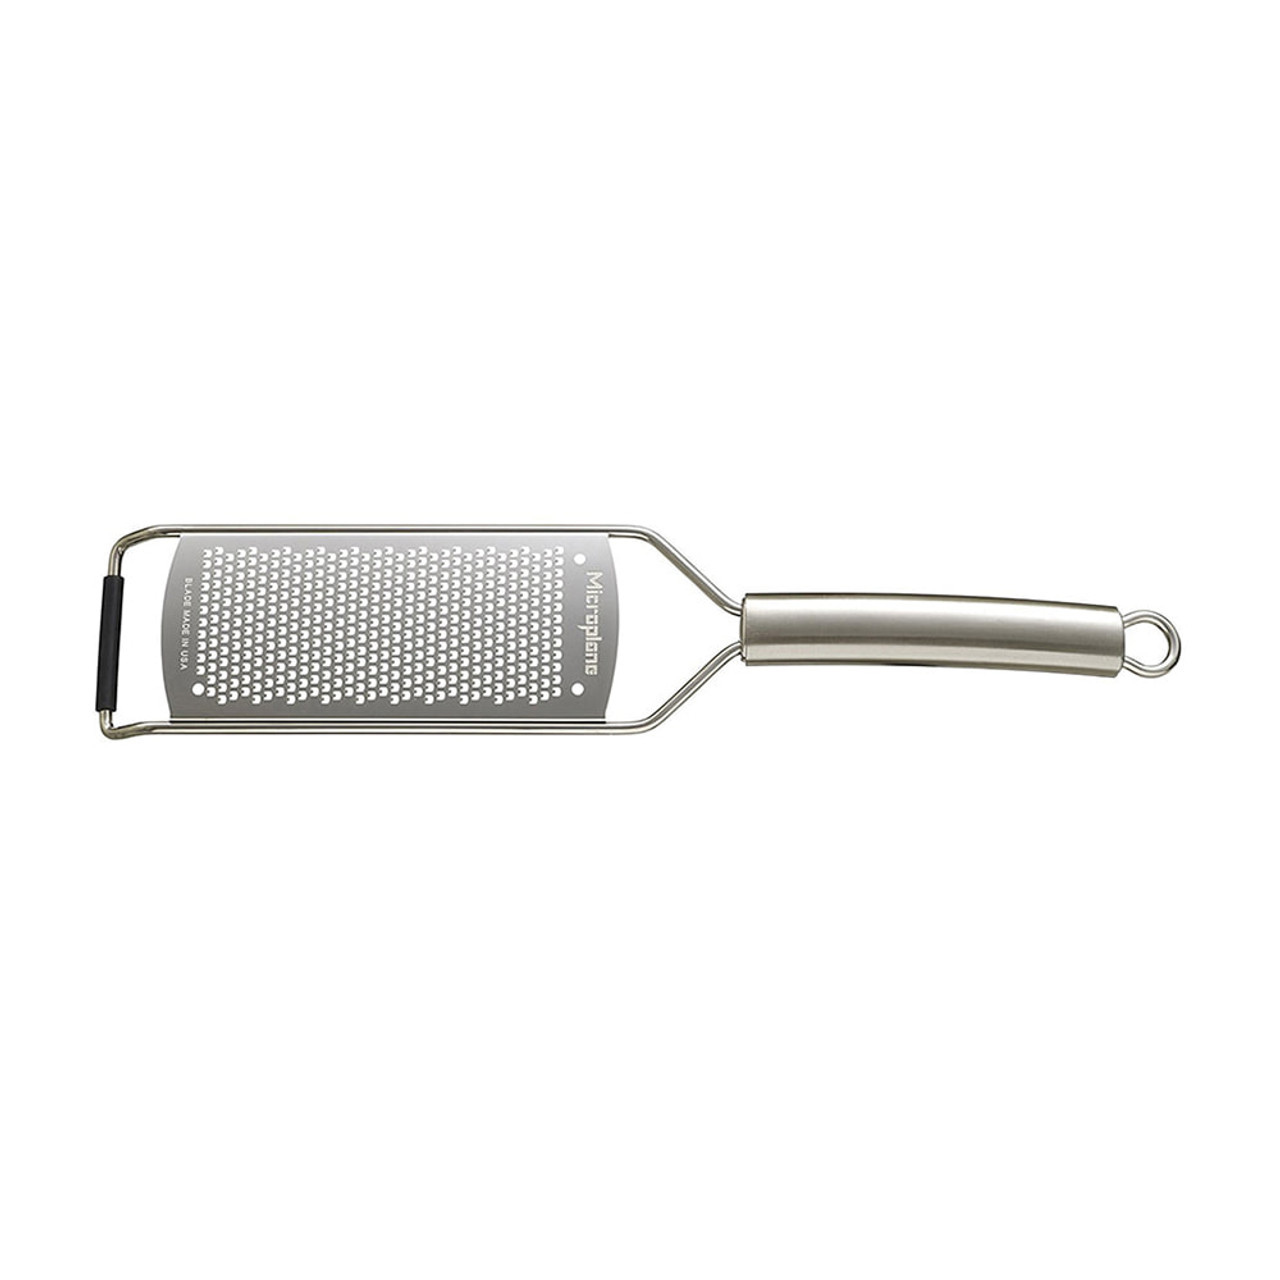 https://cdn11.bigcommerce.com/s-hccytny0od/images/stencil/1280x1280/products/1195/2816/microplane-professional-series-fine-grater__43057.1587870341.jpg?c=2?imbypass=on